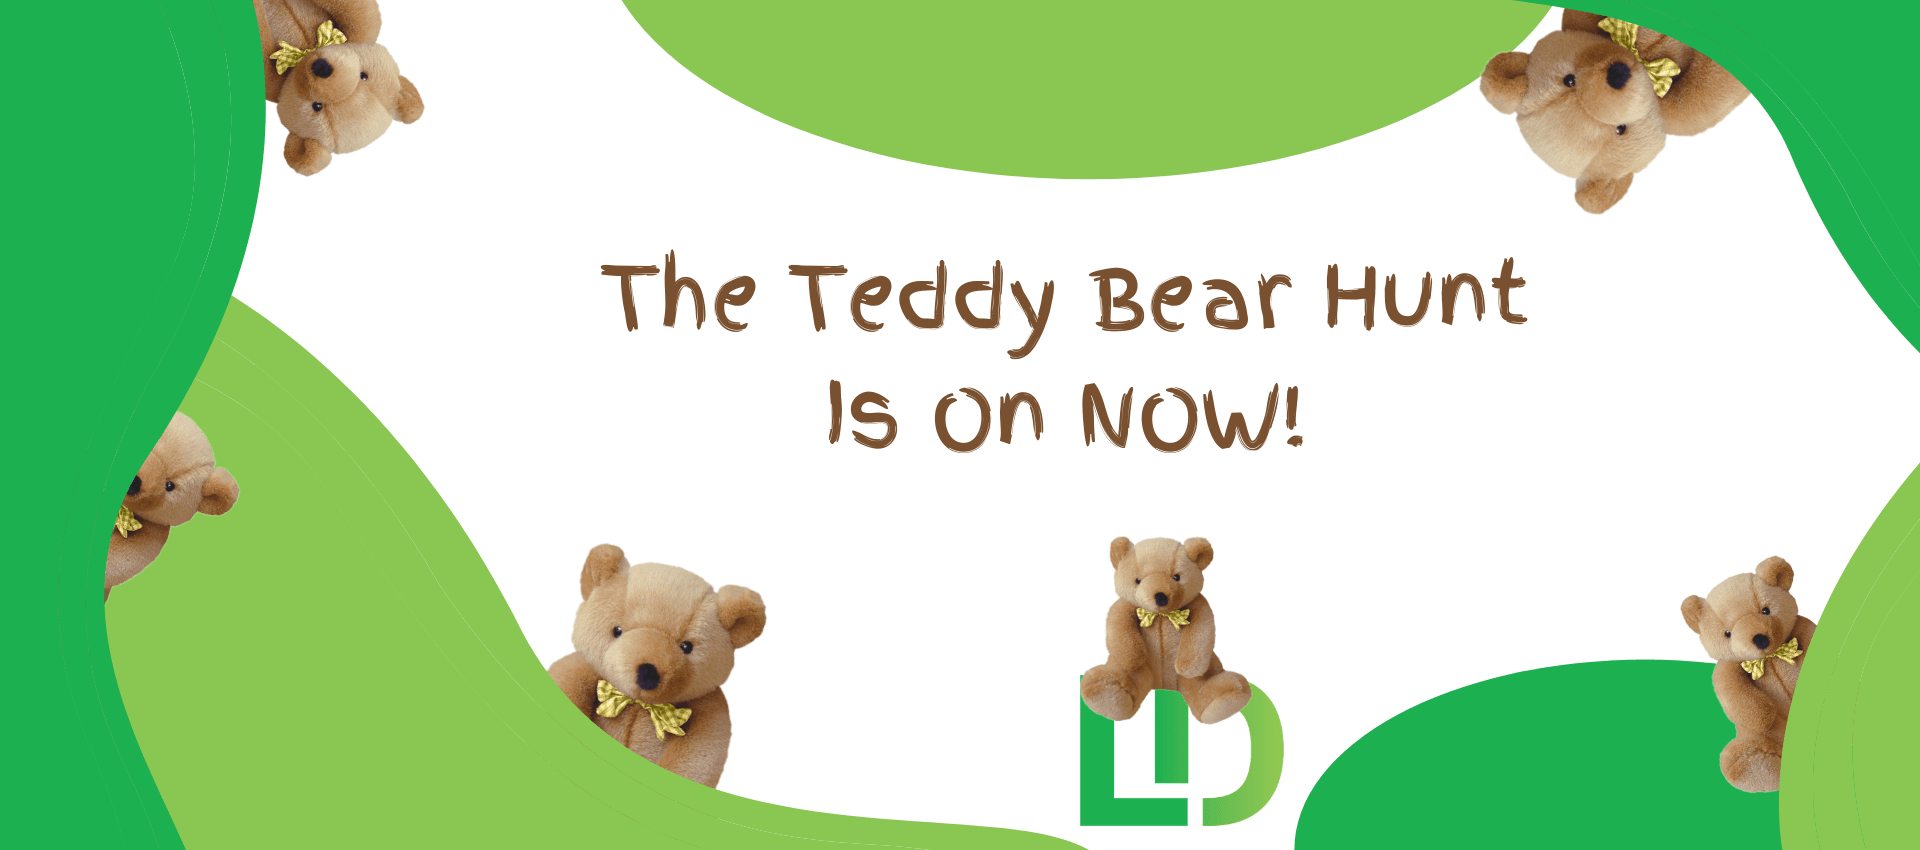 Find a Teddy Bear and WIN!